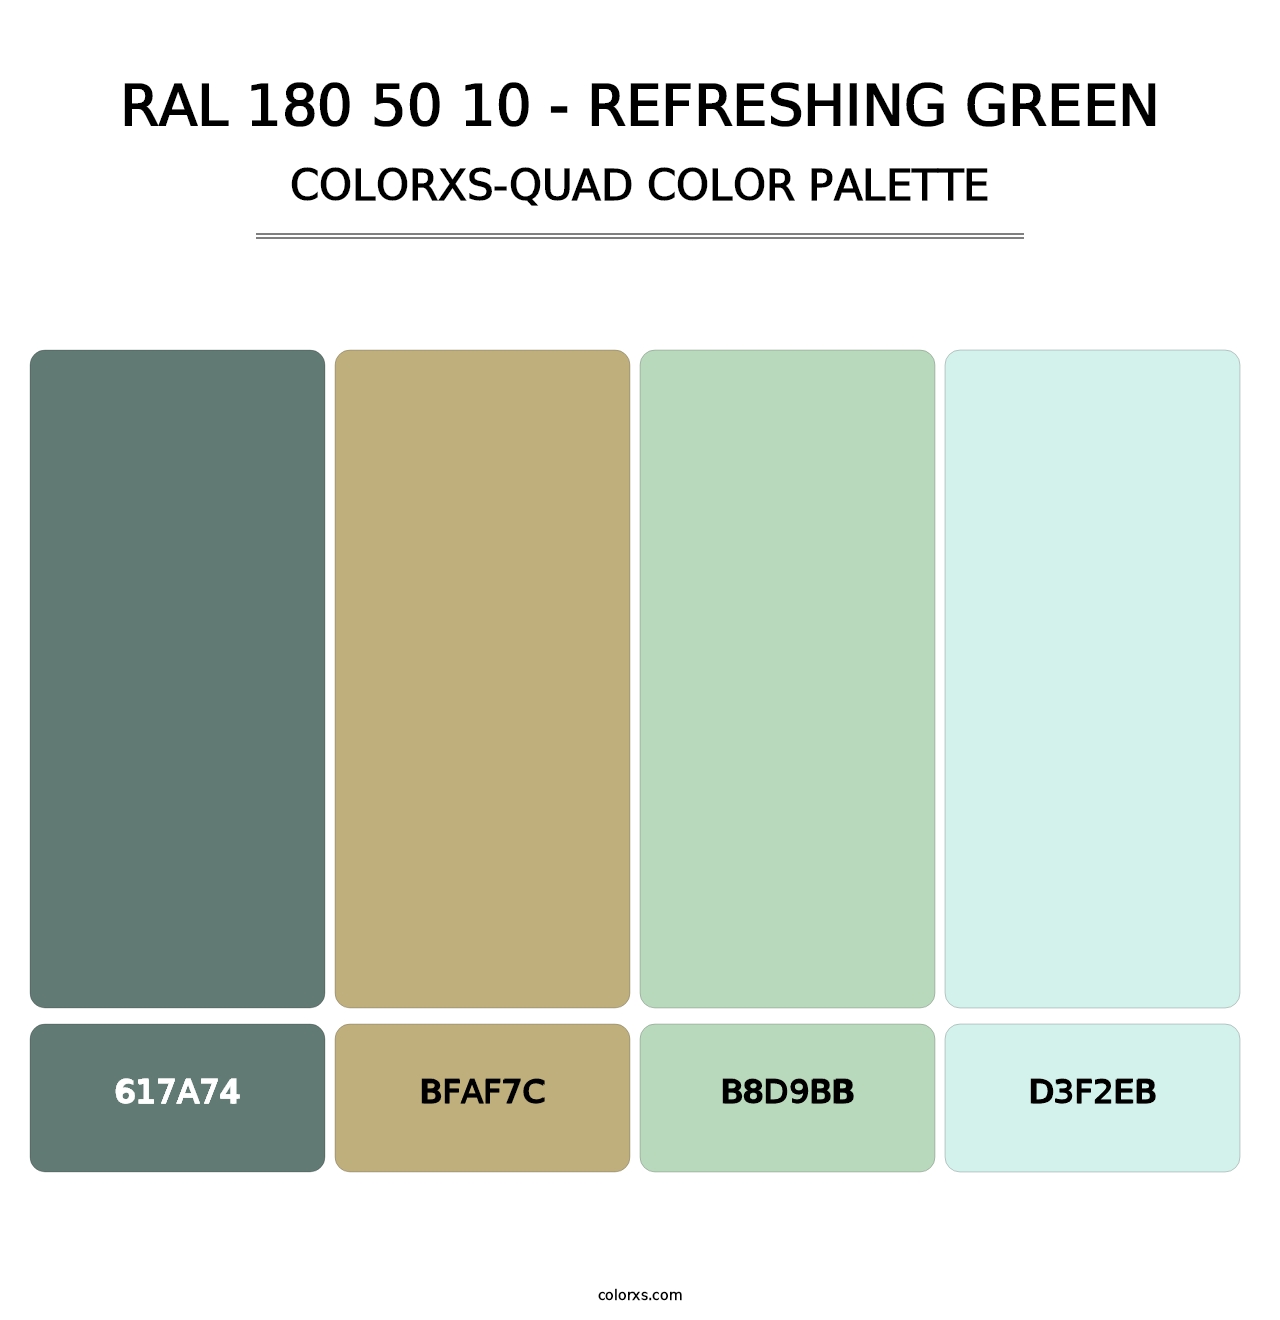 RAL 180 50 10 - Refreshing Green - Colorxs Quad Palette